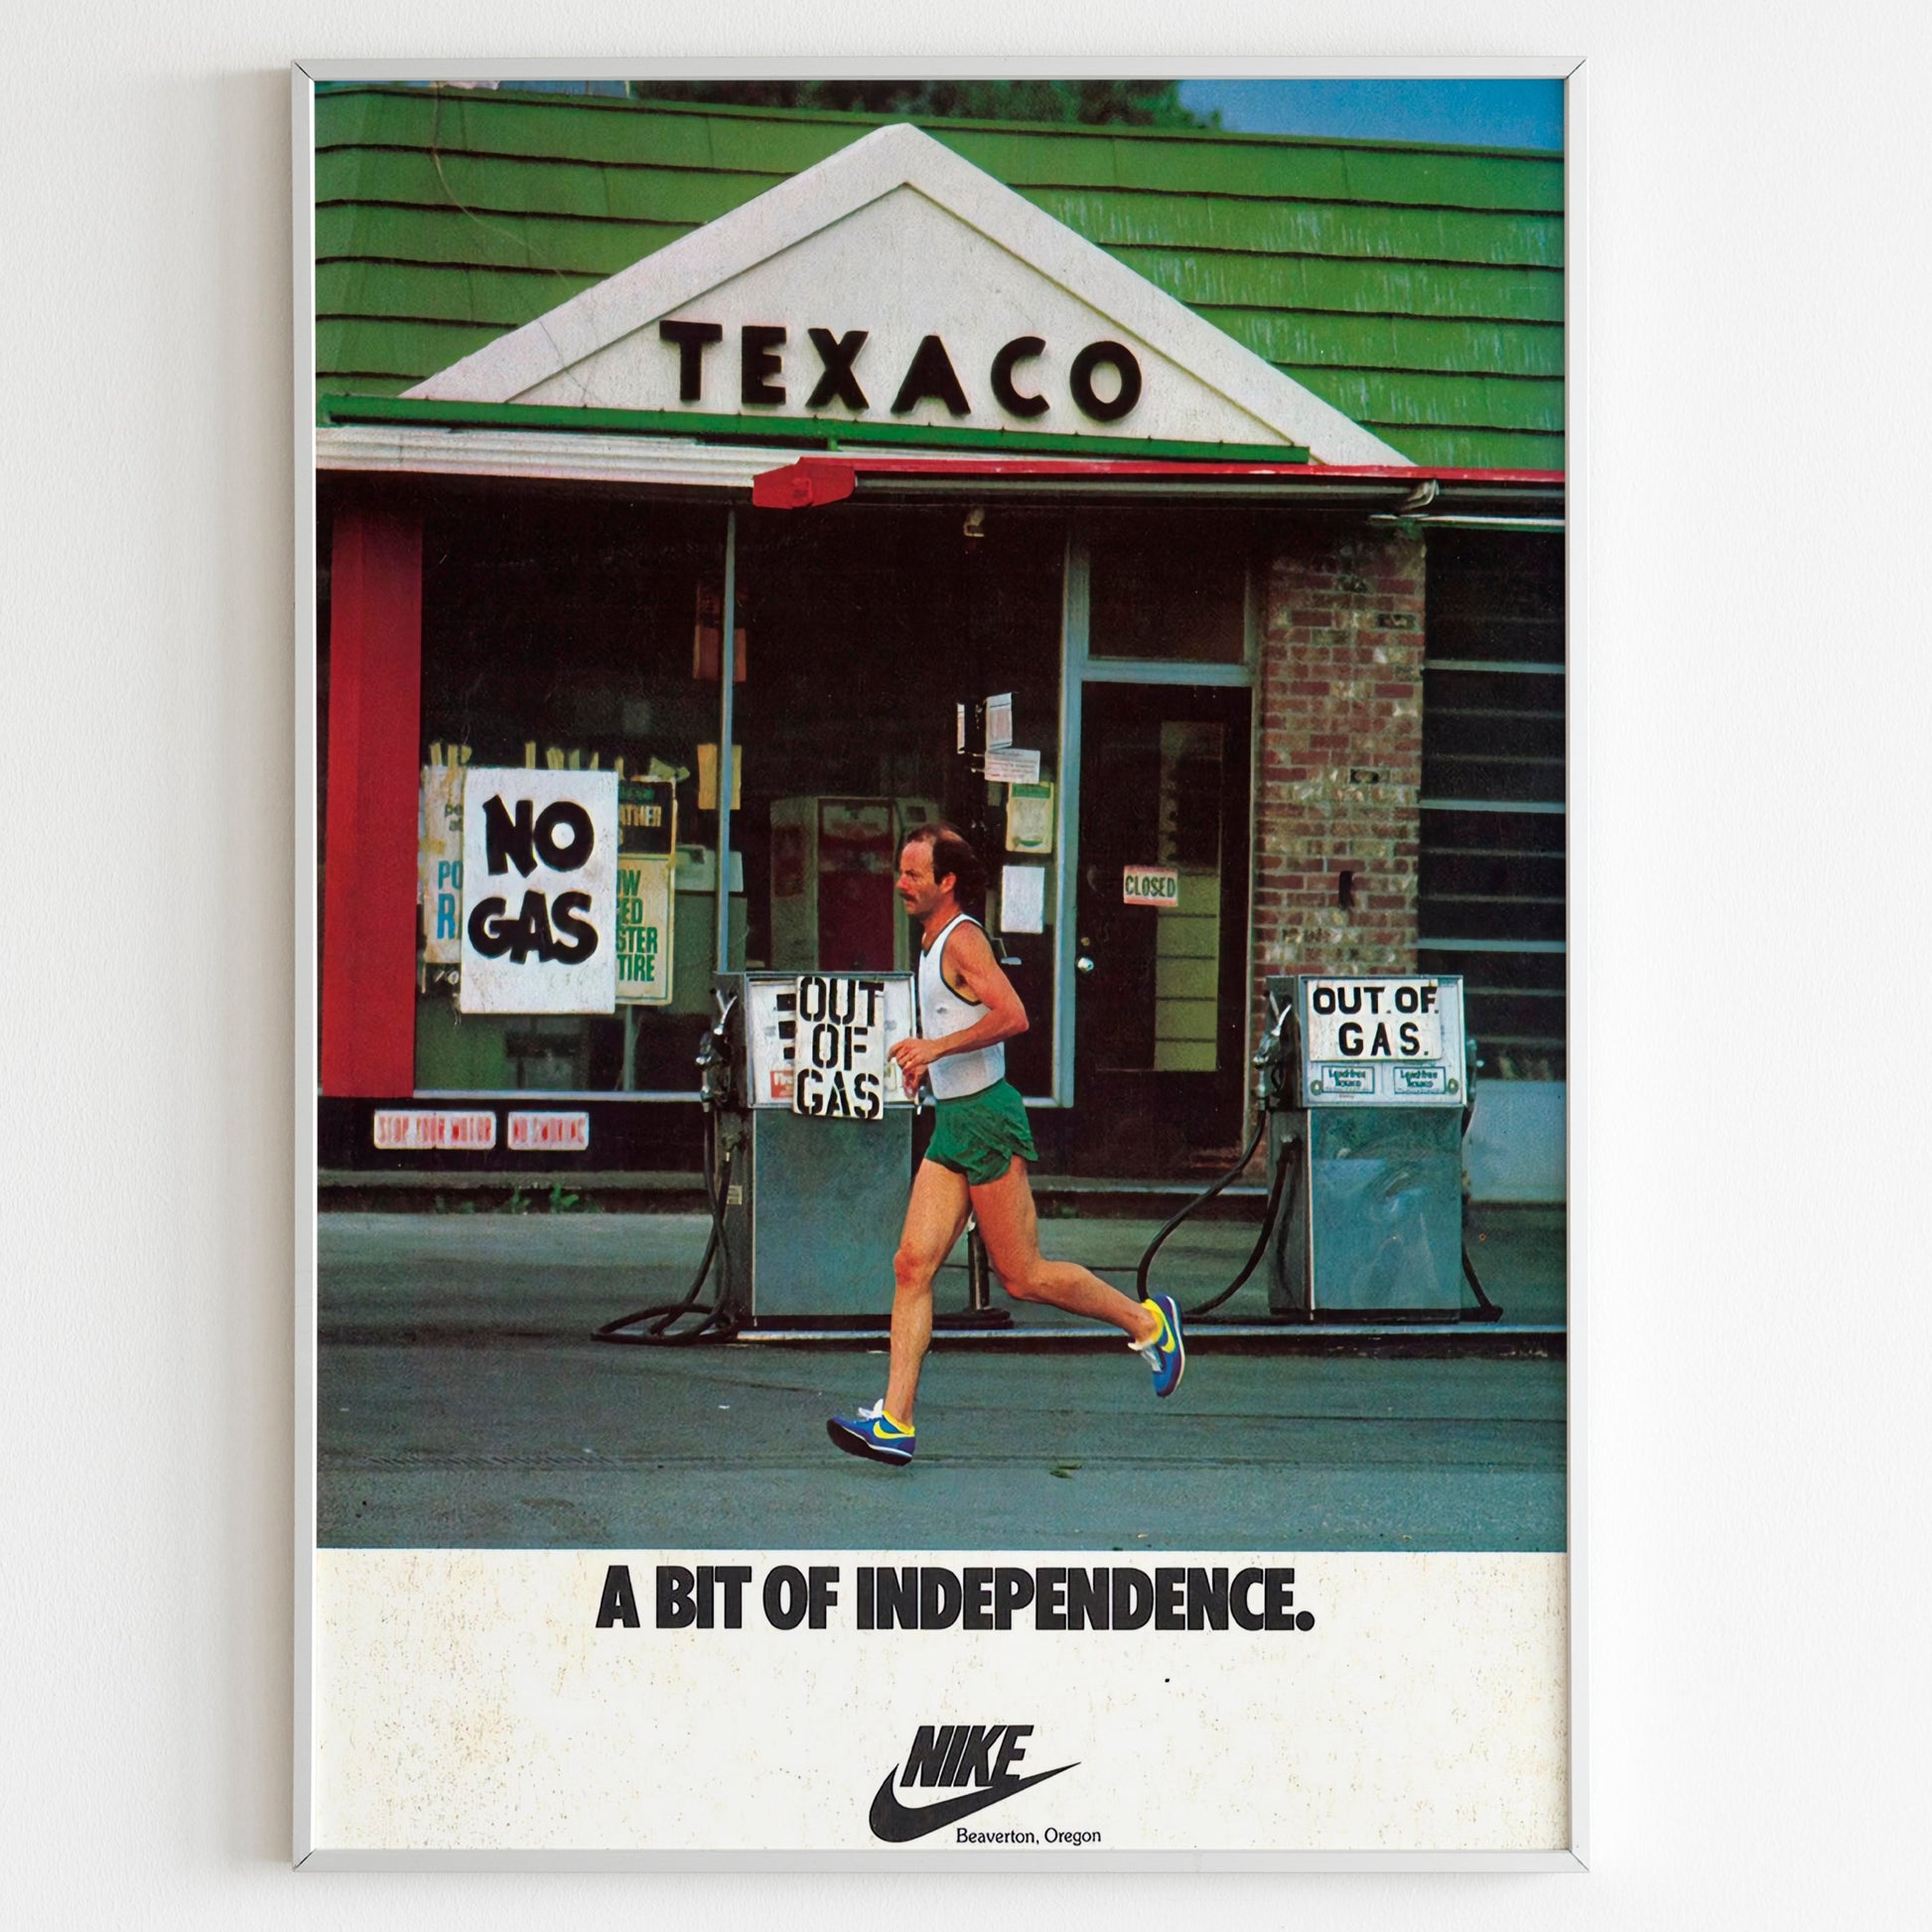 Nike "A Bit Of Independence" Advertising Poster, 90s Style Shoes Print, Vintage Running Ad Wall Art, Magazine Retro Advertisement Texaco